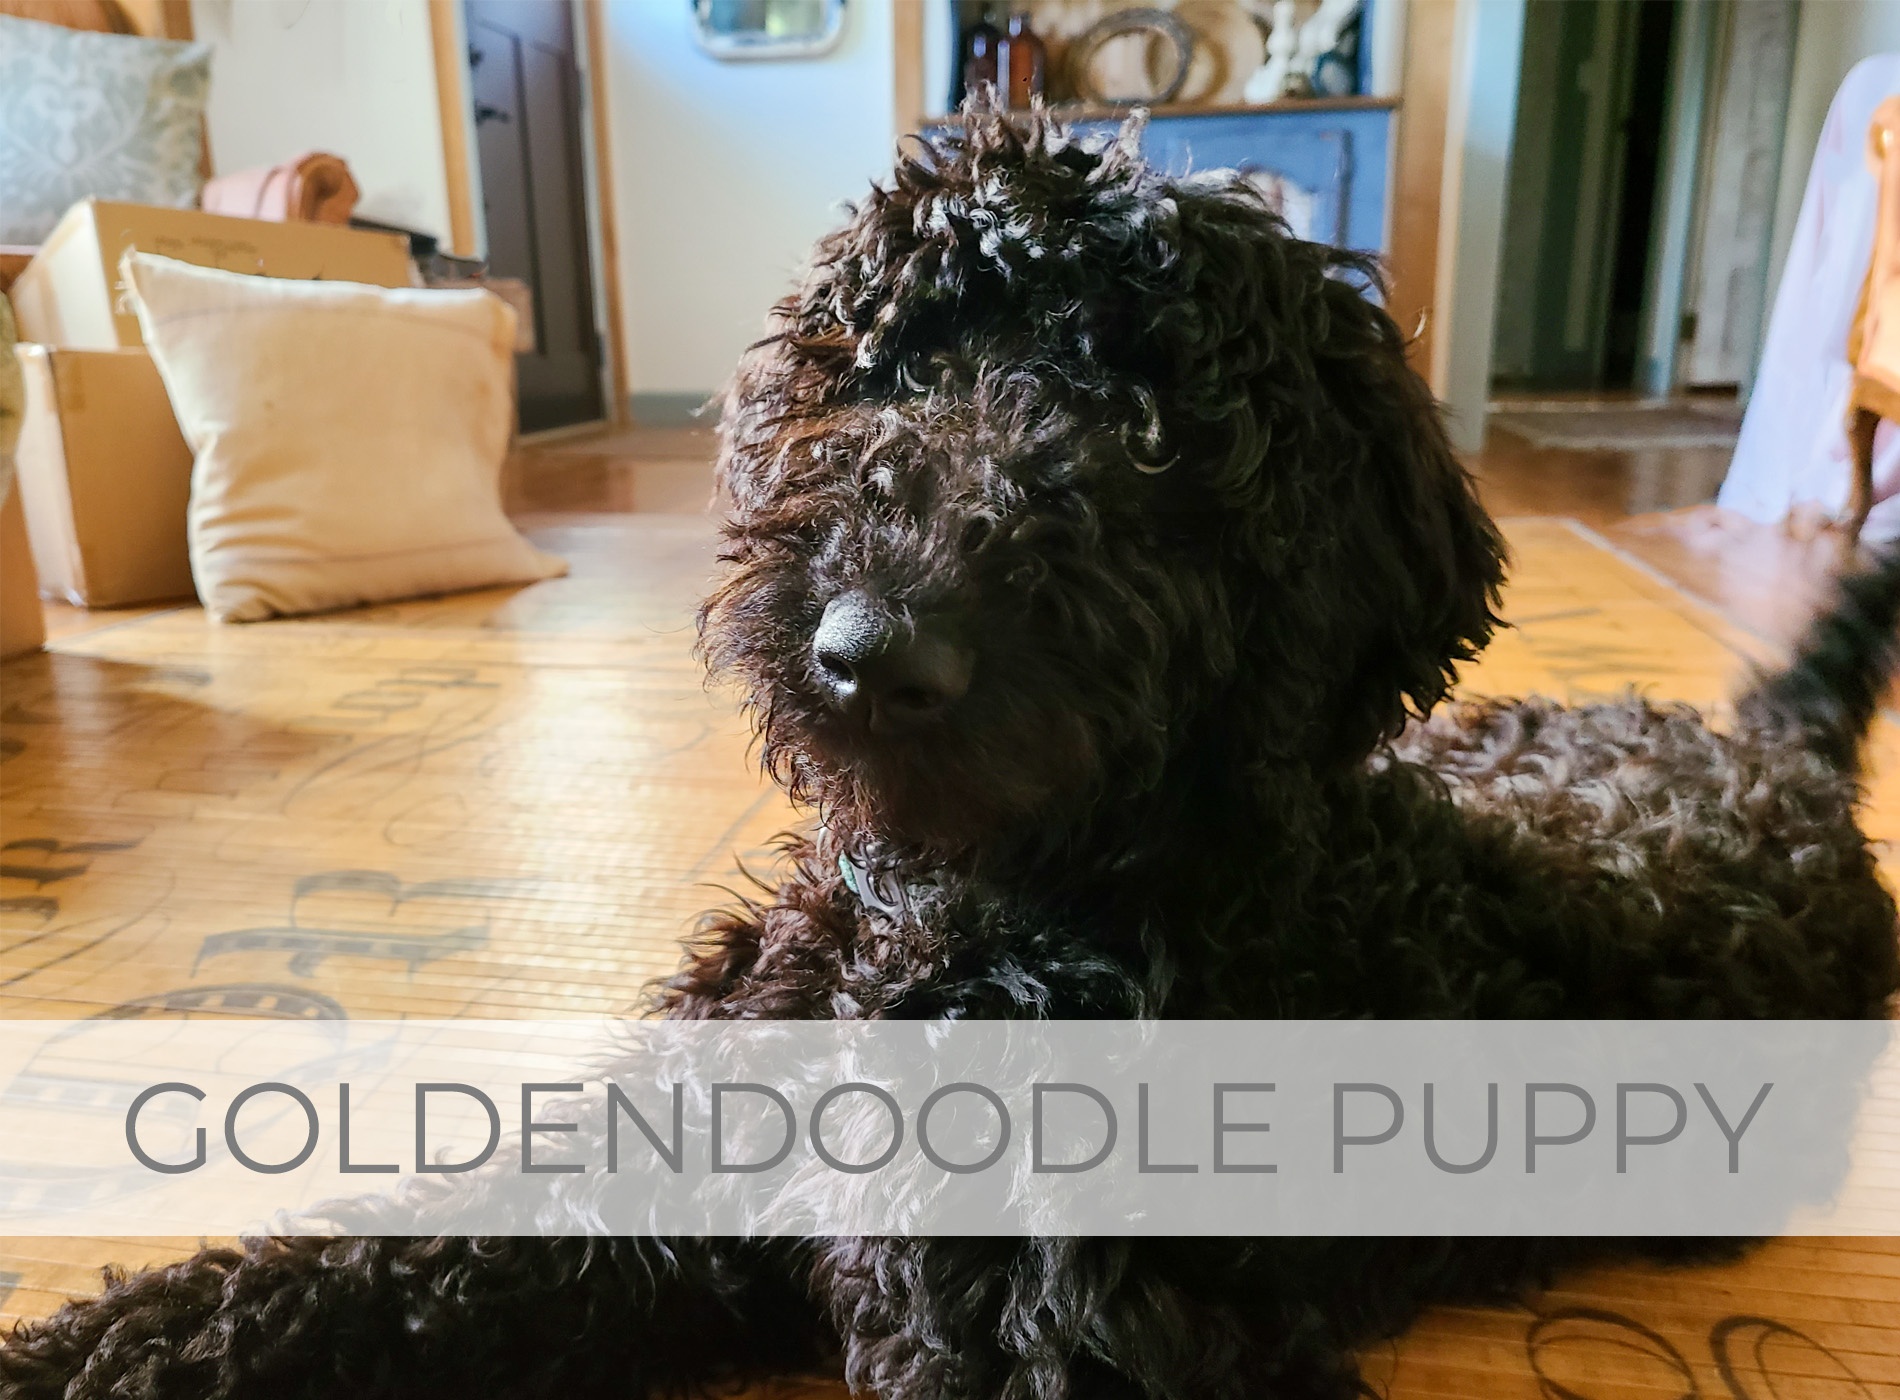 Showcase of Goldendoodle Puppy Blessing by Larissa of Prodigal Pieces | prodigalpieces.com #prodigalpieces